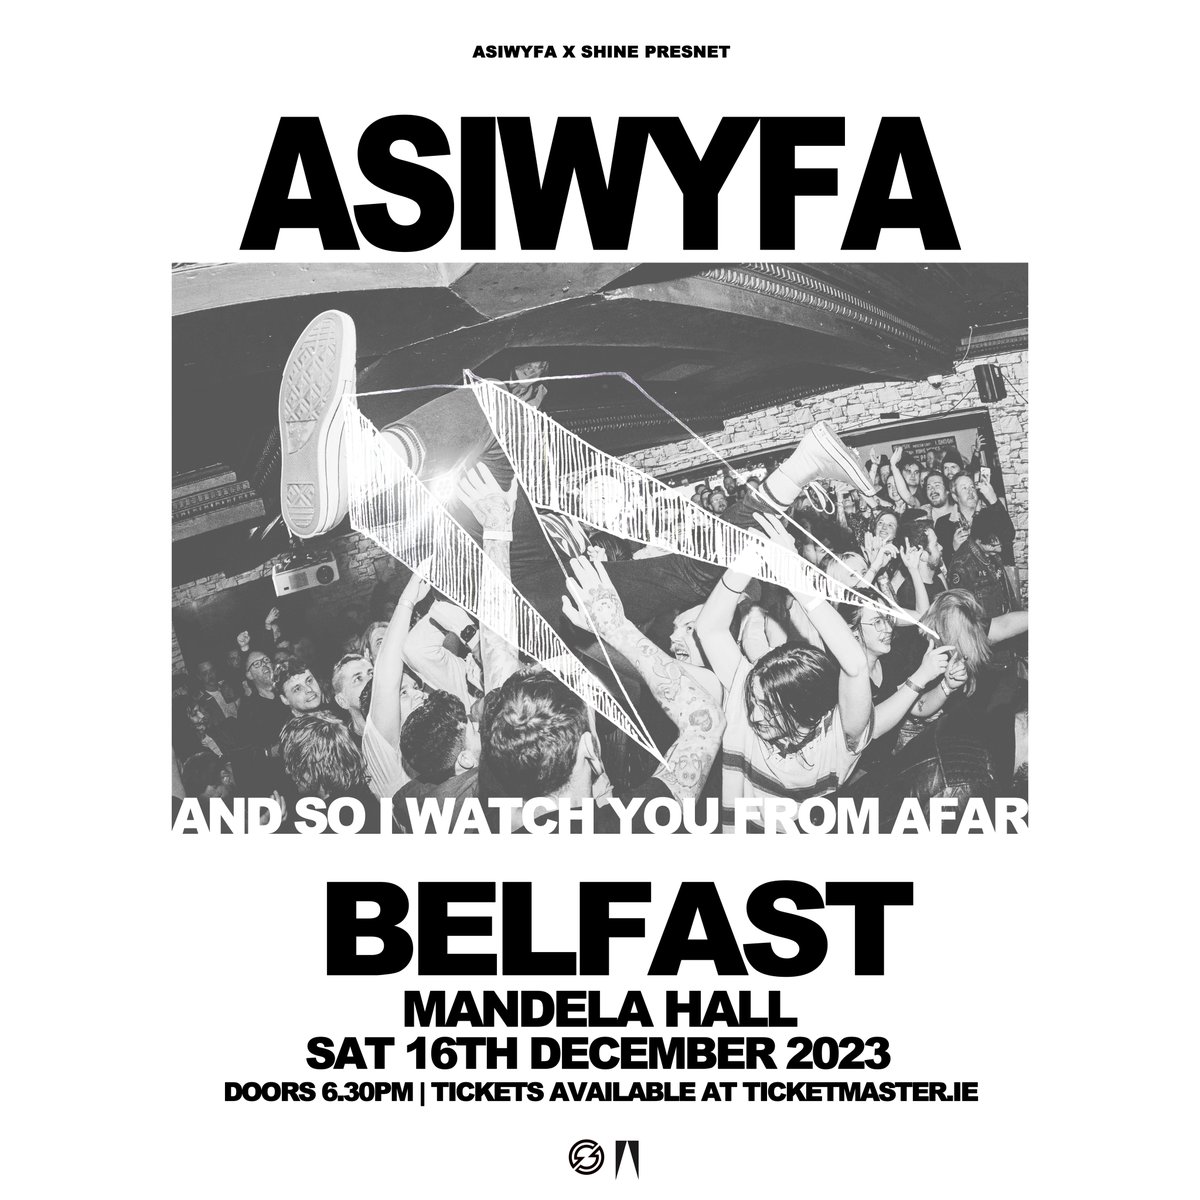 Exactly one year on from their last show at @mandelahall, post-rock hometown heroes And So I Watch You From Afar (@ASIWYFA_BAND) will be returning for their annual Christmas show on December 16! Tickets are on sale now👉 bit.ly/3gSnIg1